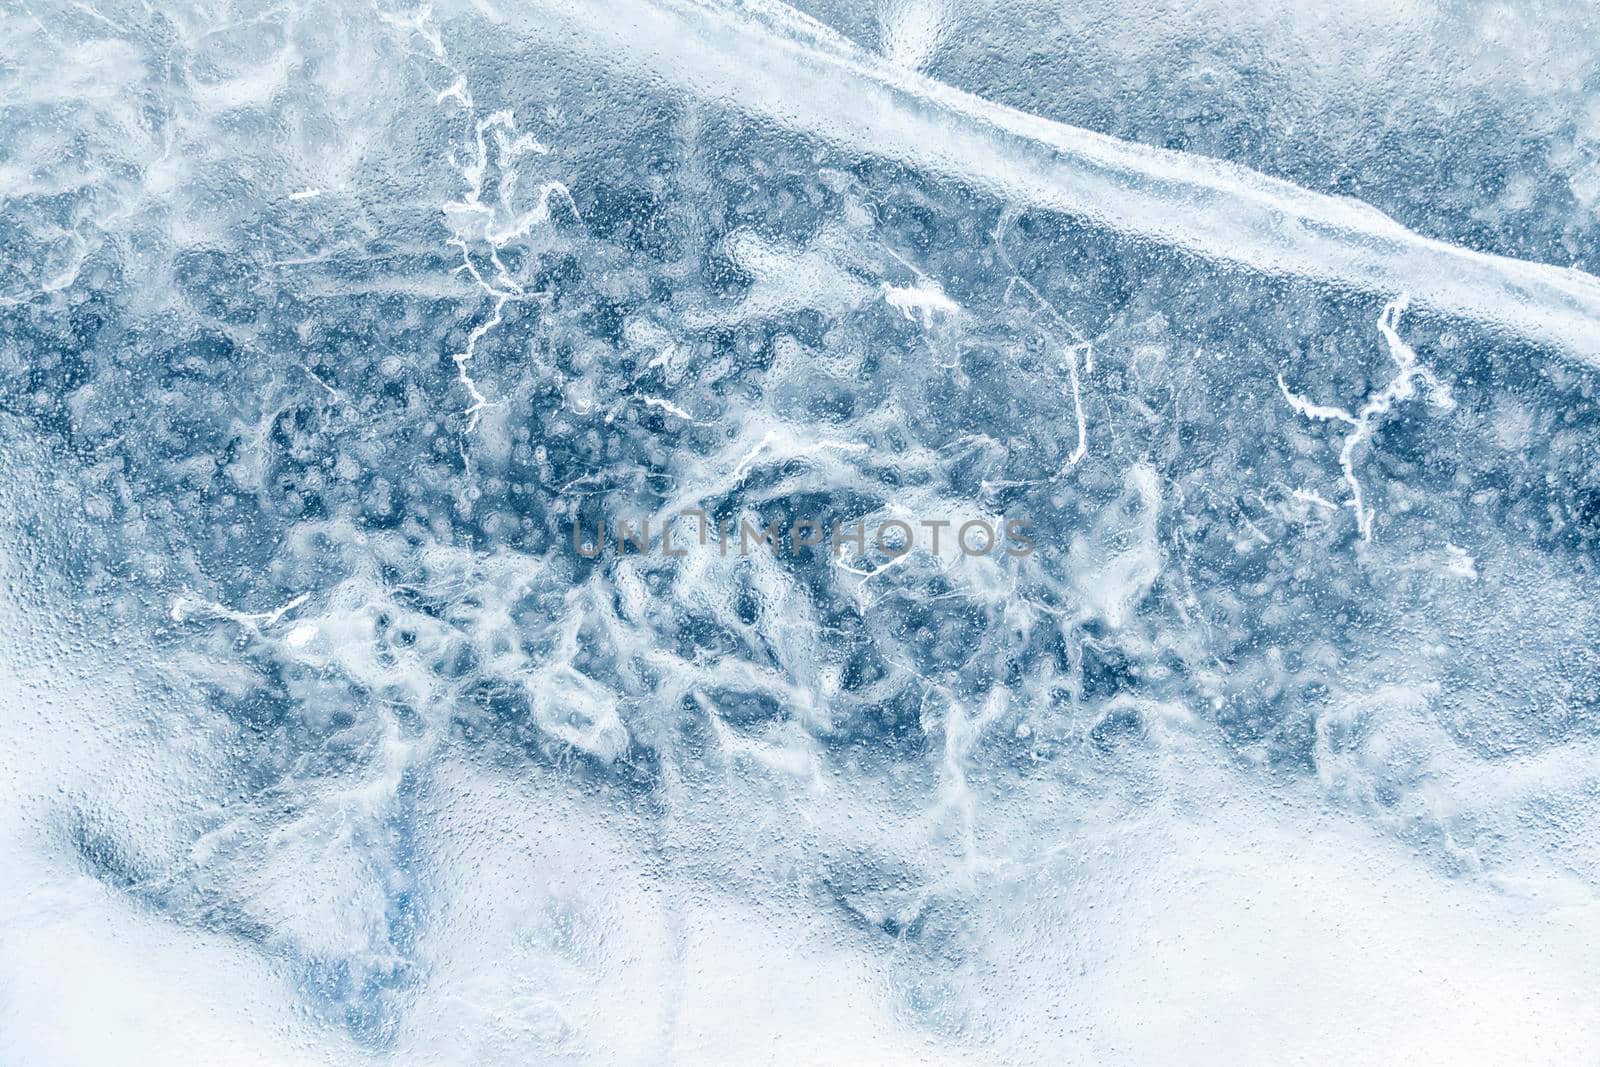 ice texture with cracks and patterns. winter background by Lena_Ogurtsova